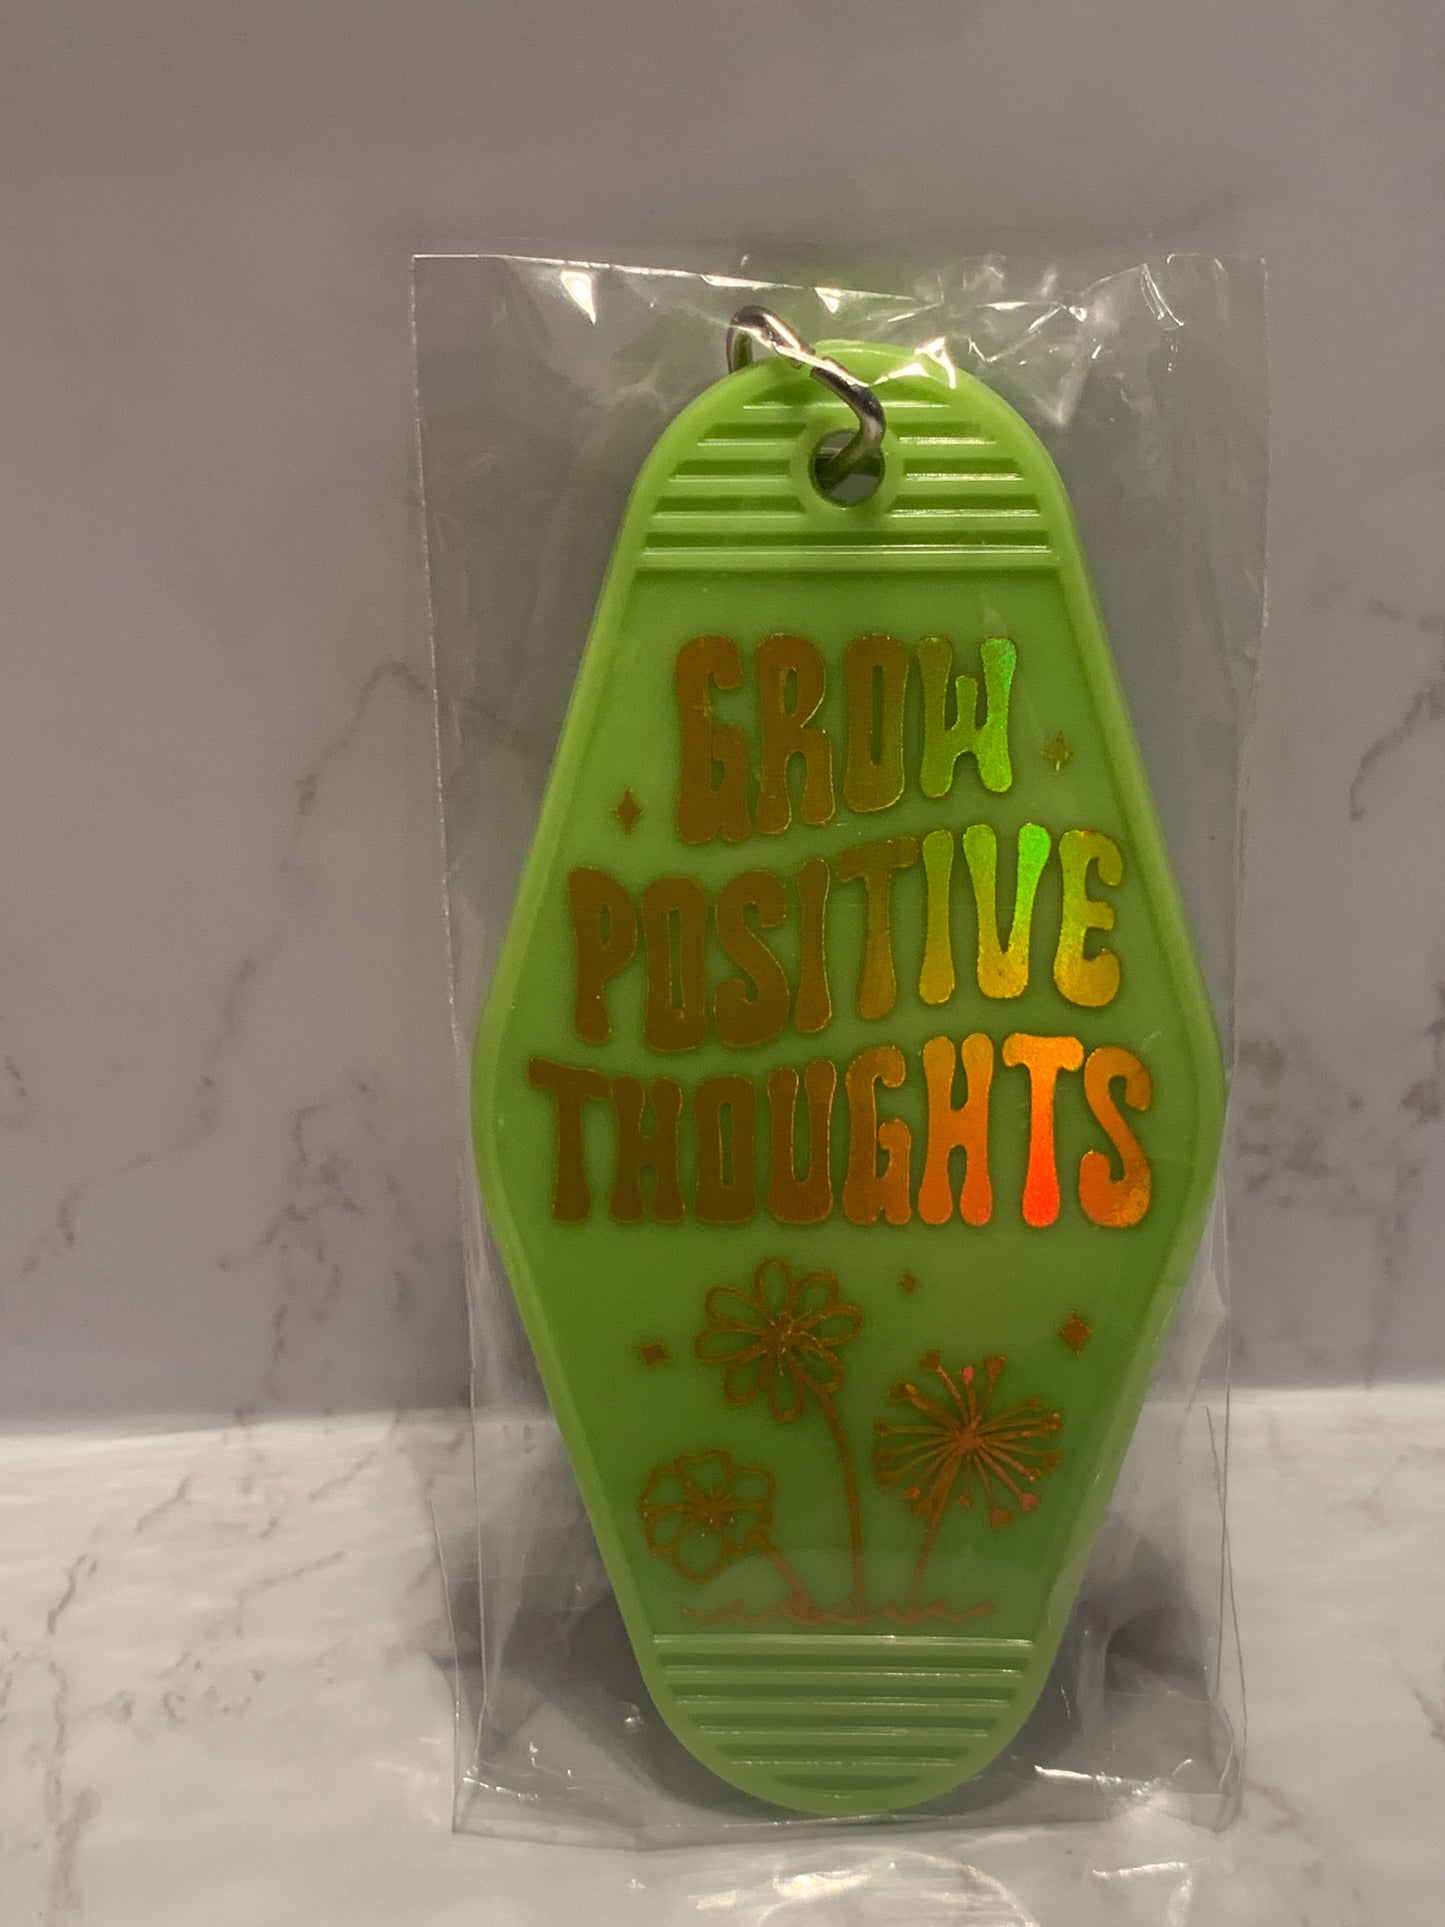 “Grow positive thoughts” classic motel style keychain